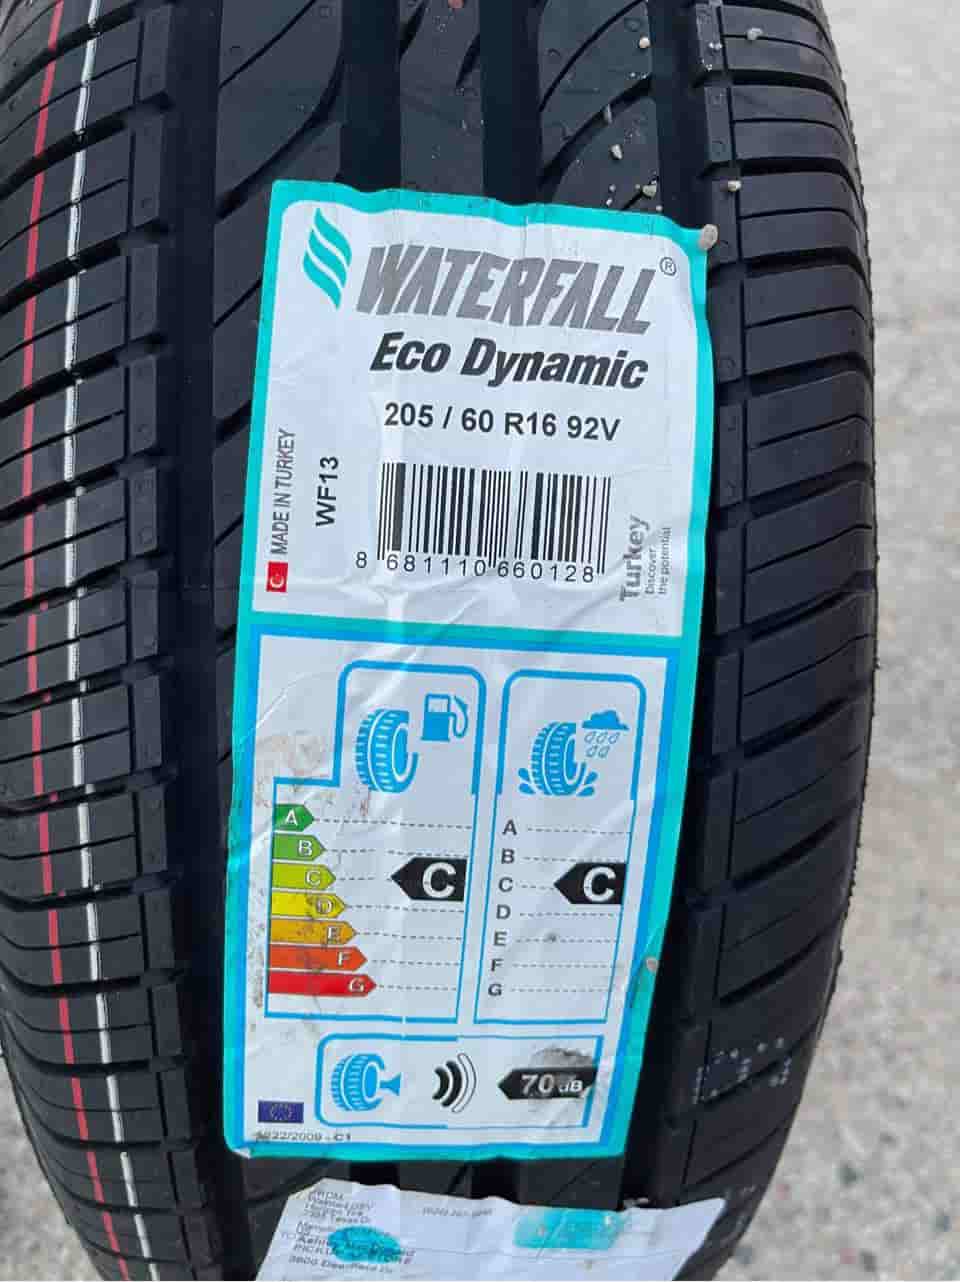  Waterfall Eco Dynamic Tires